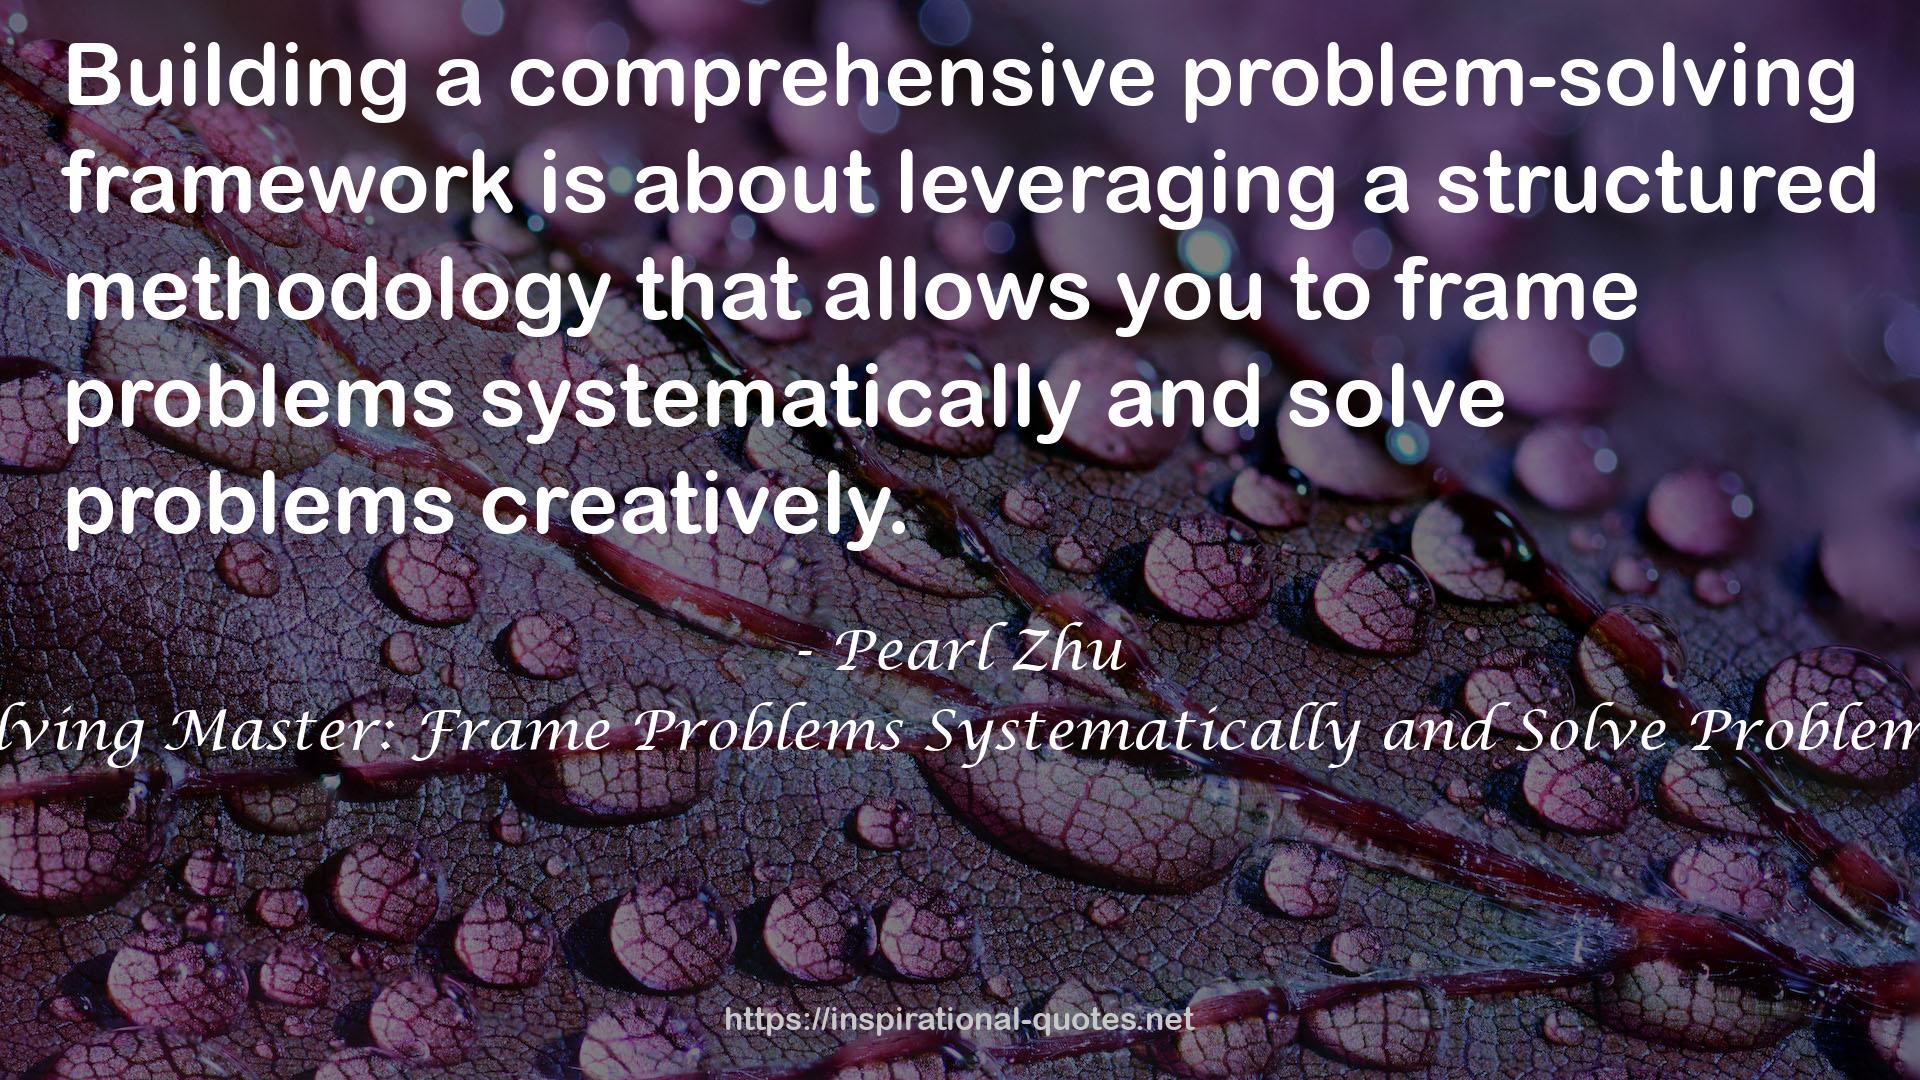 Problem Solving Master: Frame Problems Systematically and Solve Problem Creatively QUOTES